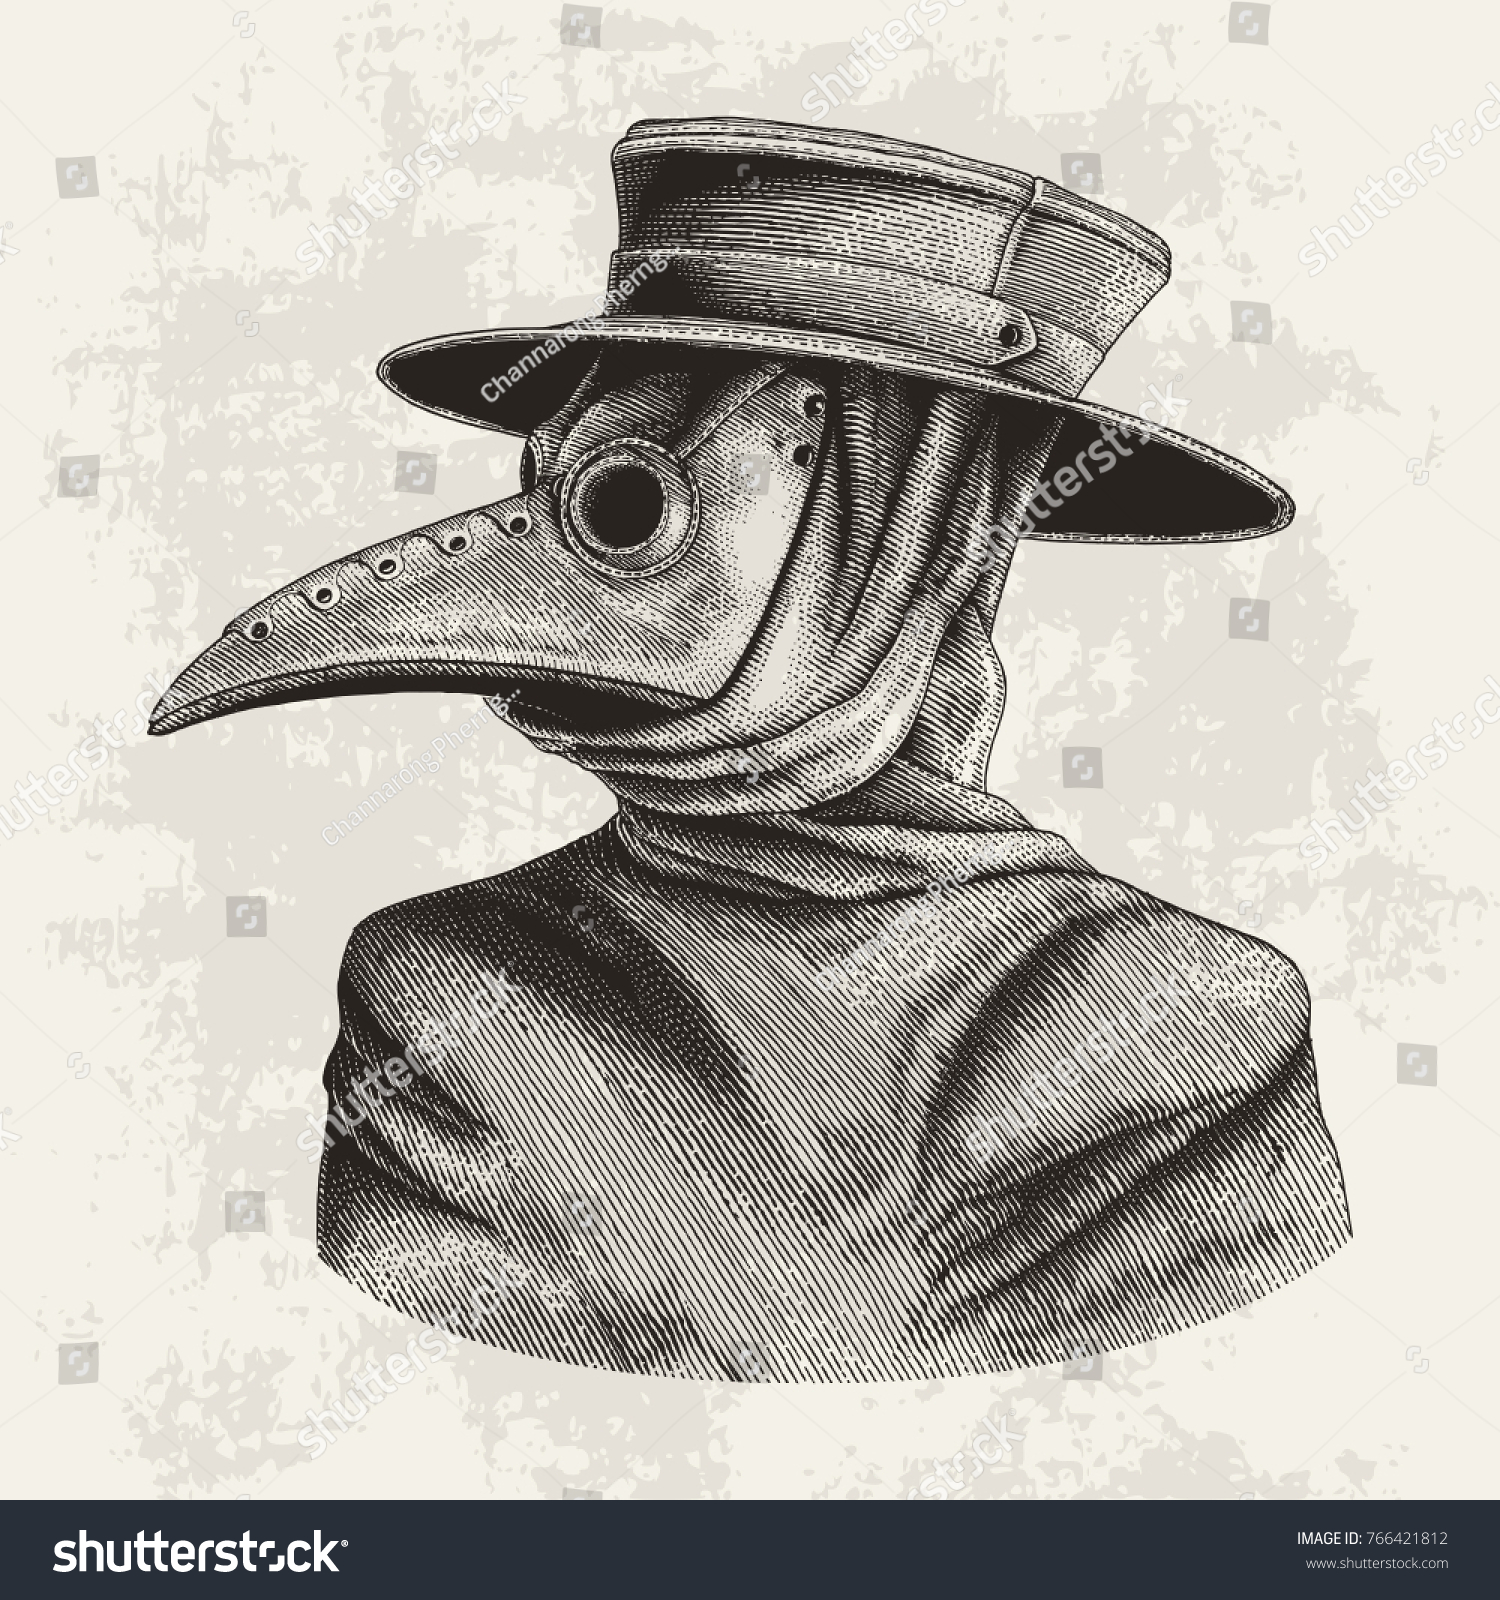 SVG of Plague doctor hand drawing vintage engraving isolate on grunge background svg